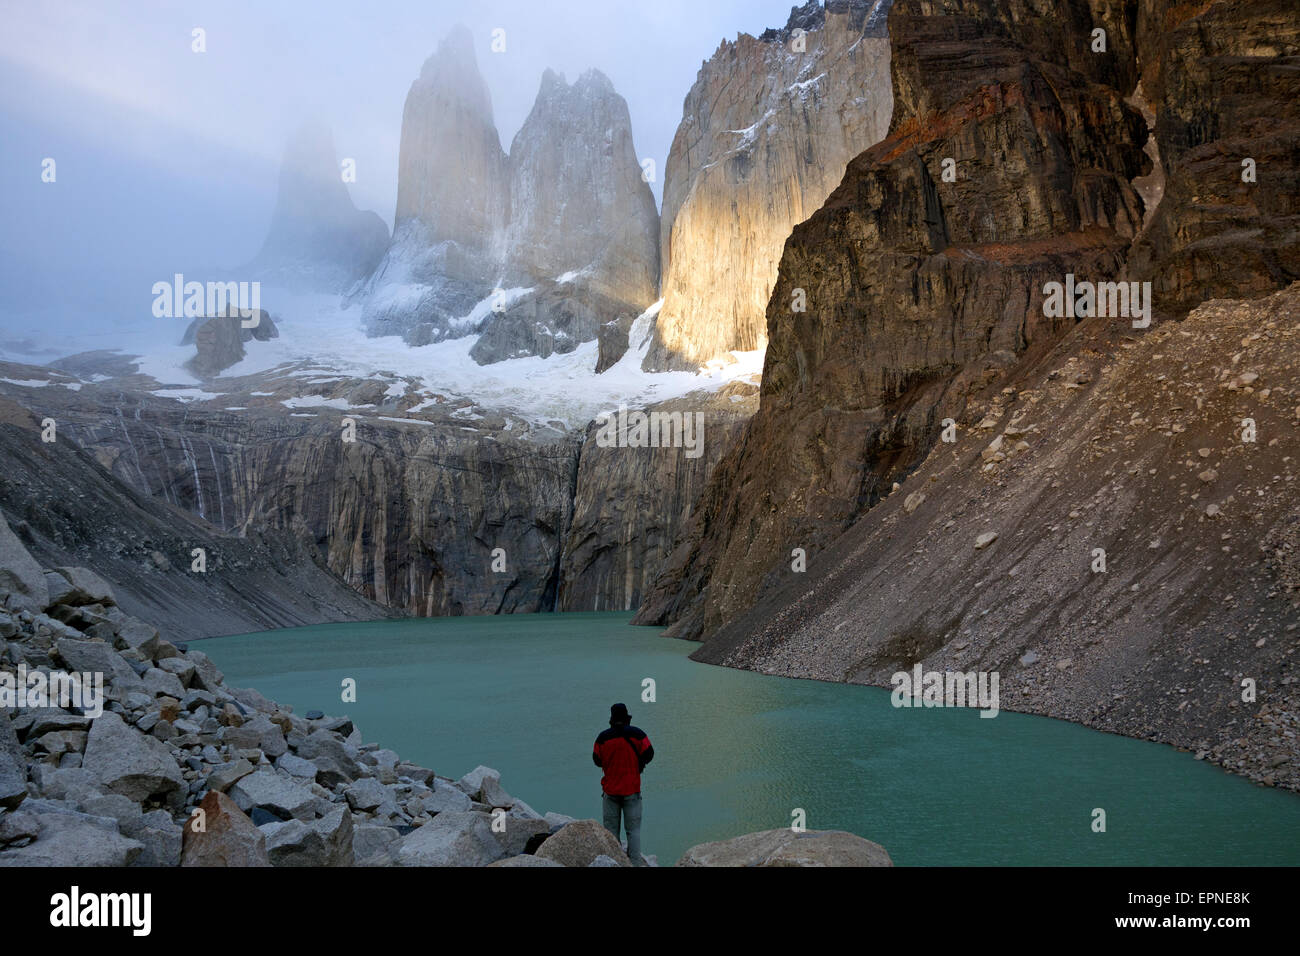 Towers Of Paine Stock Photos & Towers Of Paine Stock Images - Alamy